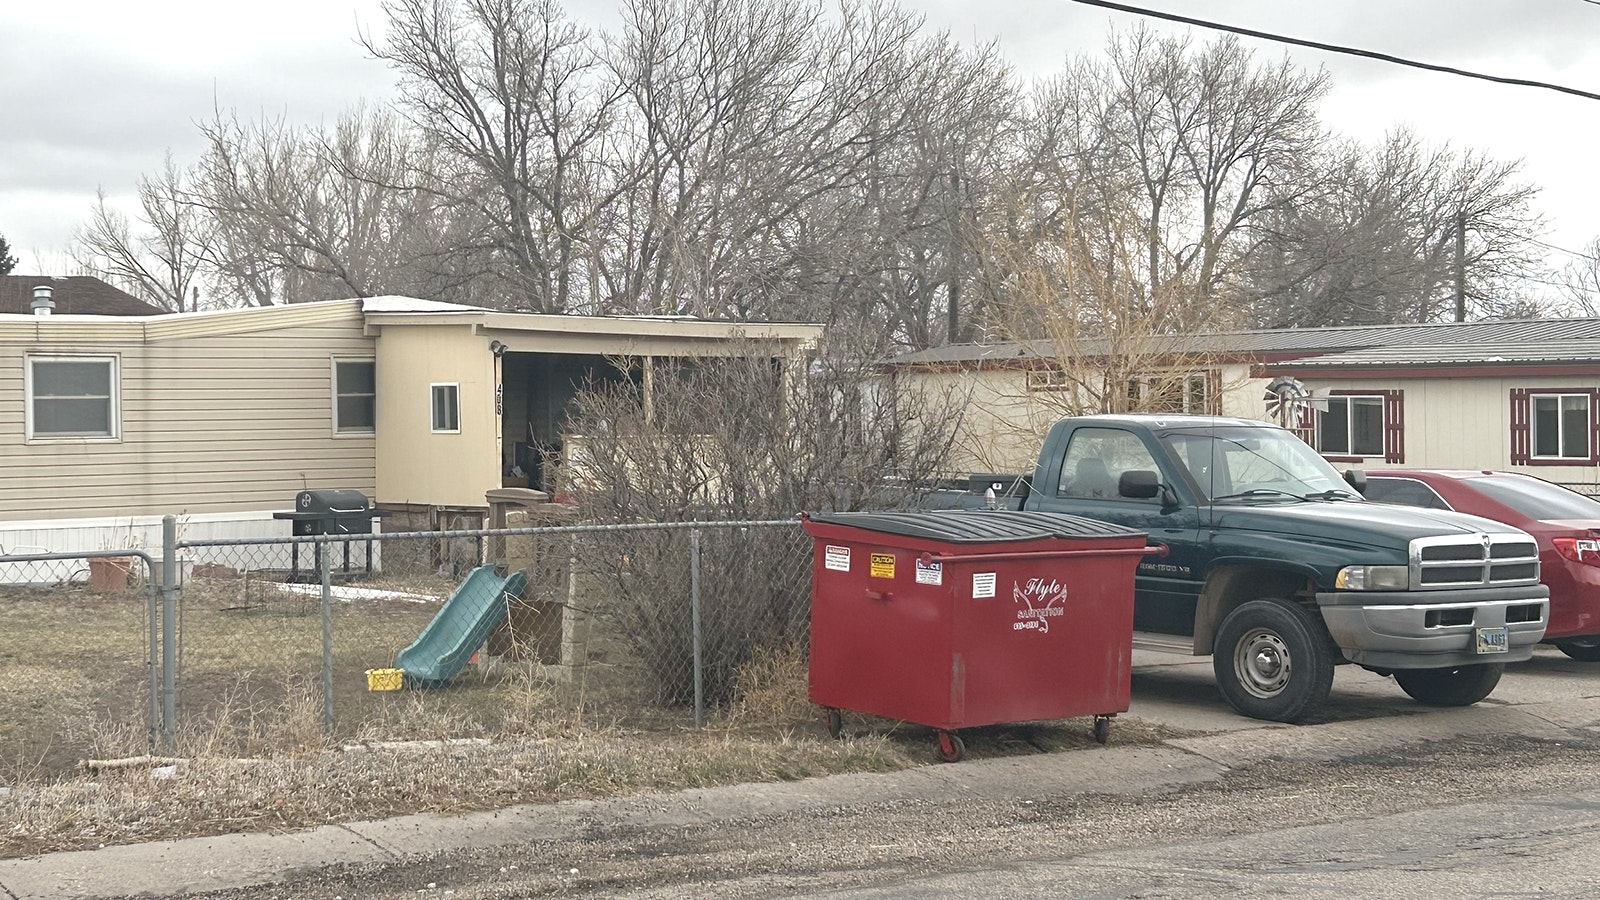 Three people accused of stealing solar panel hardware told police they found the items in a dumpster. One of the dumpsters they claimed was at the West Winds Mobile Home Park in Cheyenne.